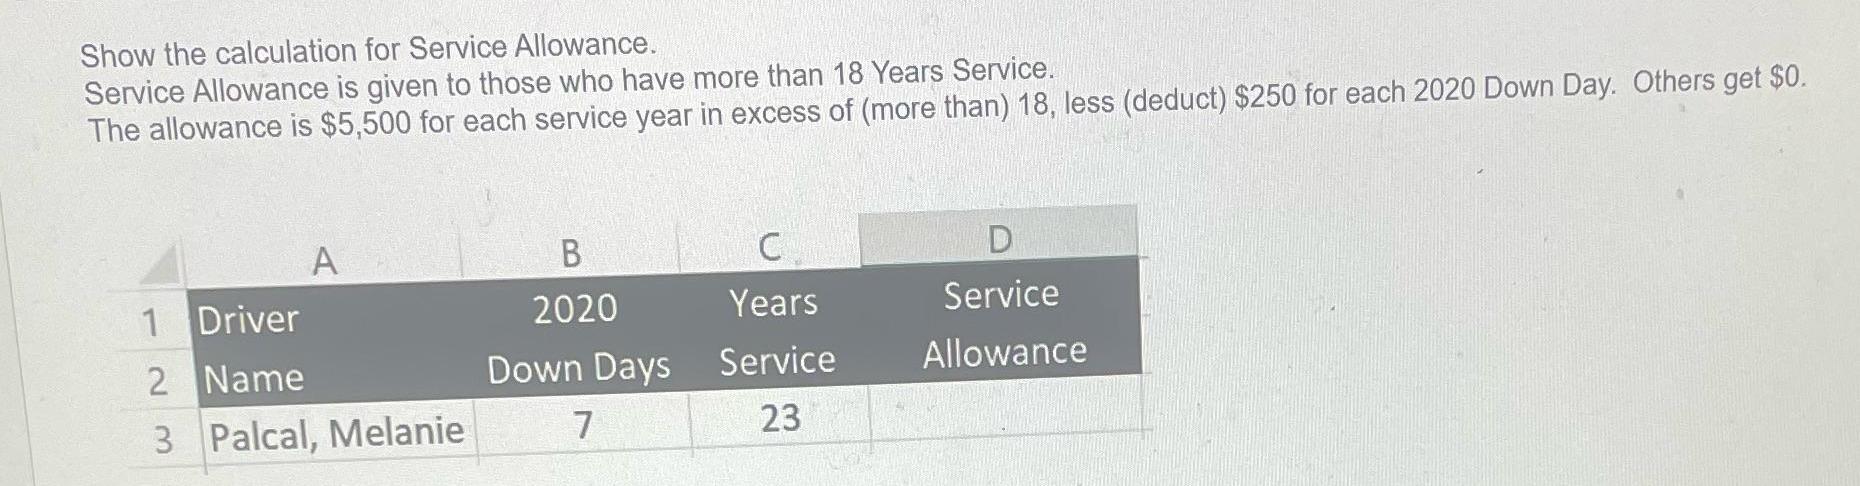 Show the calculation for Service Allowance. Service Allowance is given to those who have more than 18 Years